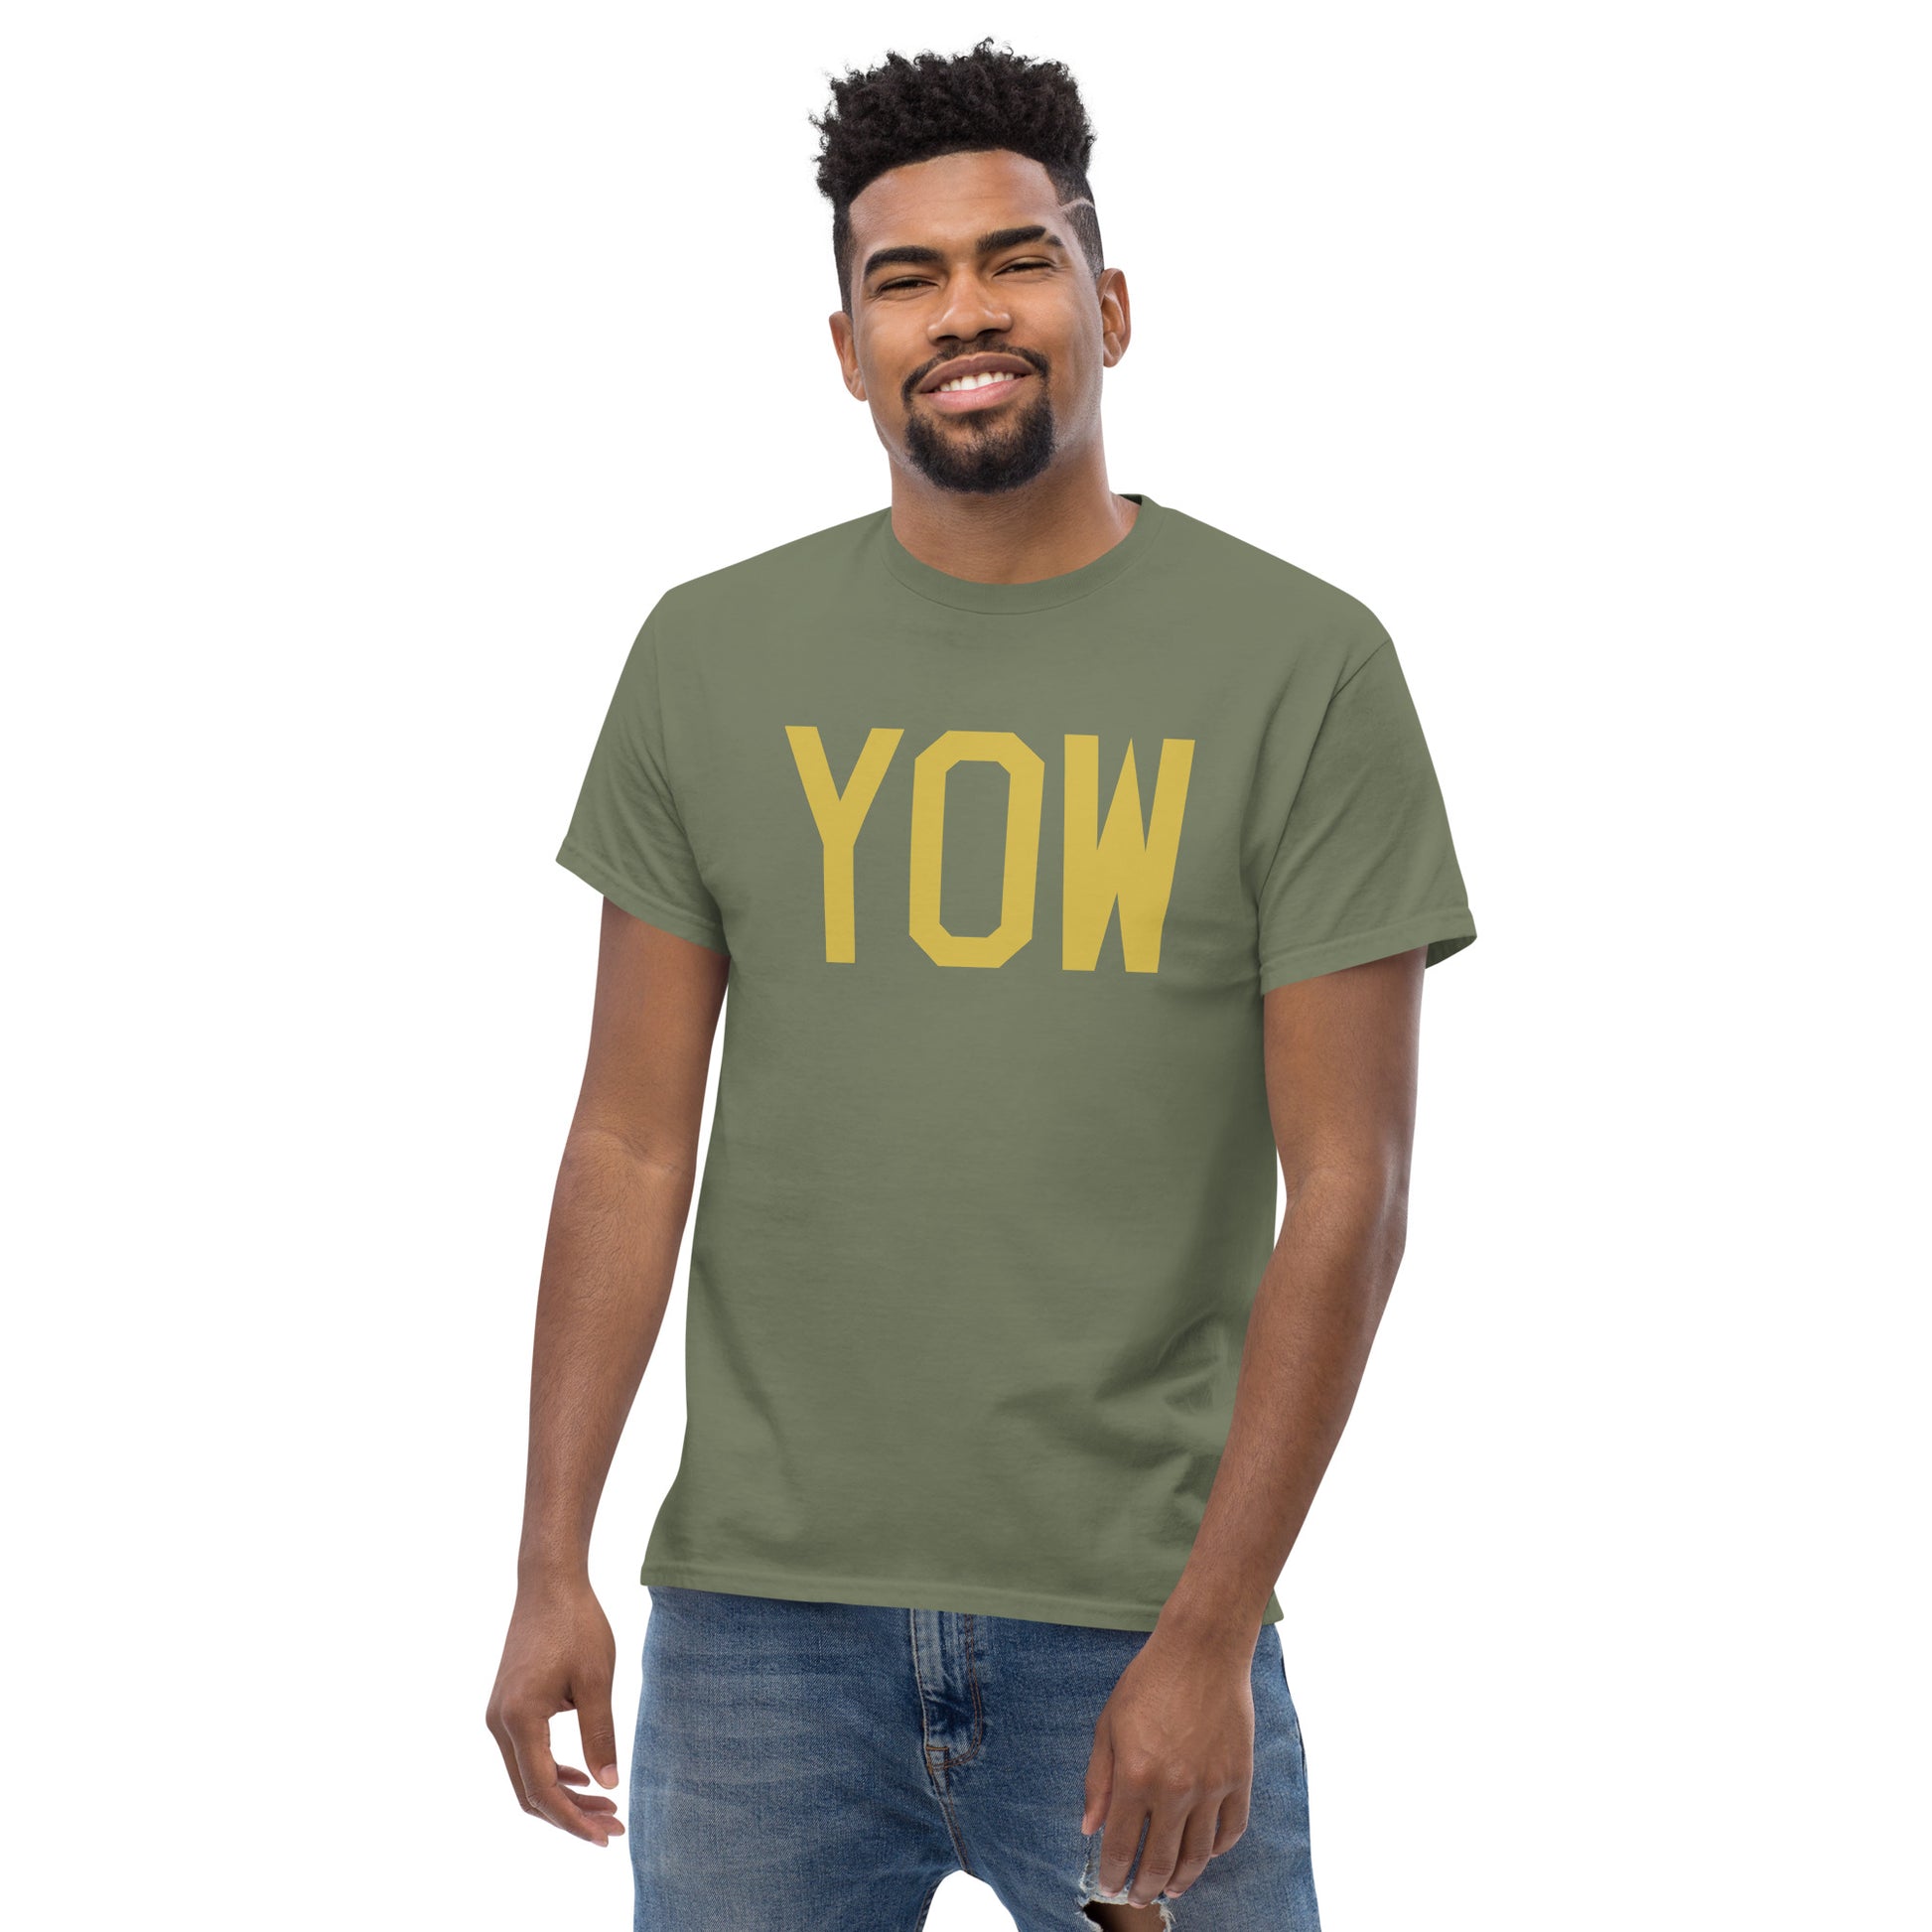 Aviation Enthusiast Men's Tee - Old Gold Graphic • YOW Ottawa • YHM Designs - Image 06